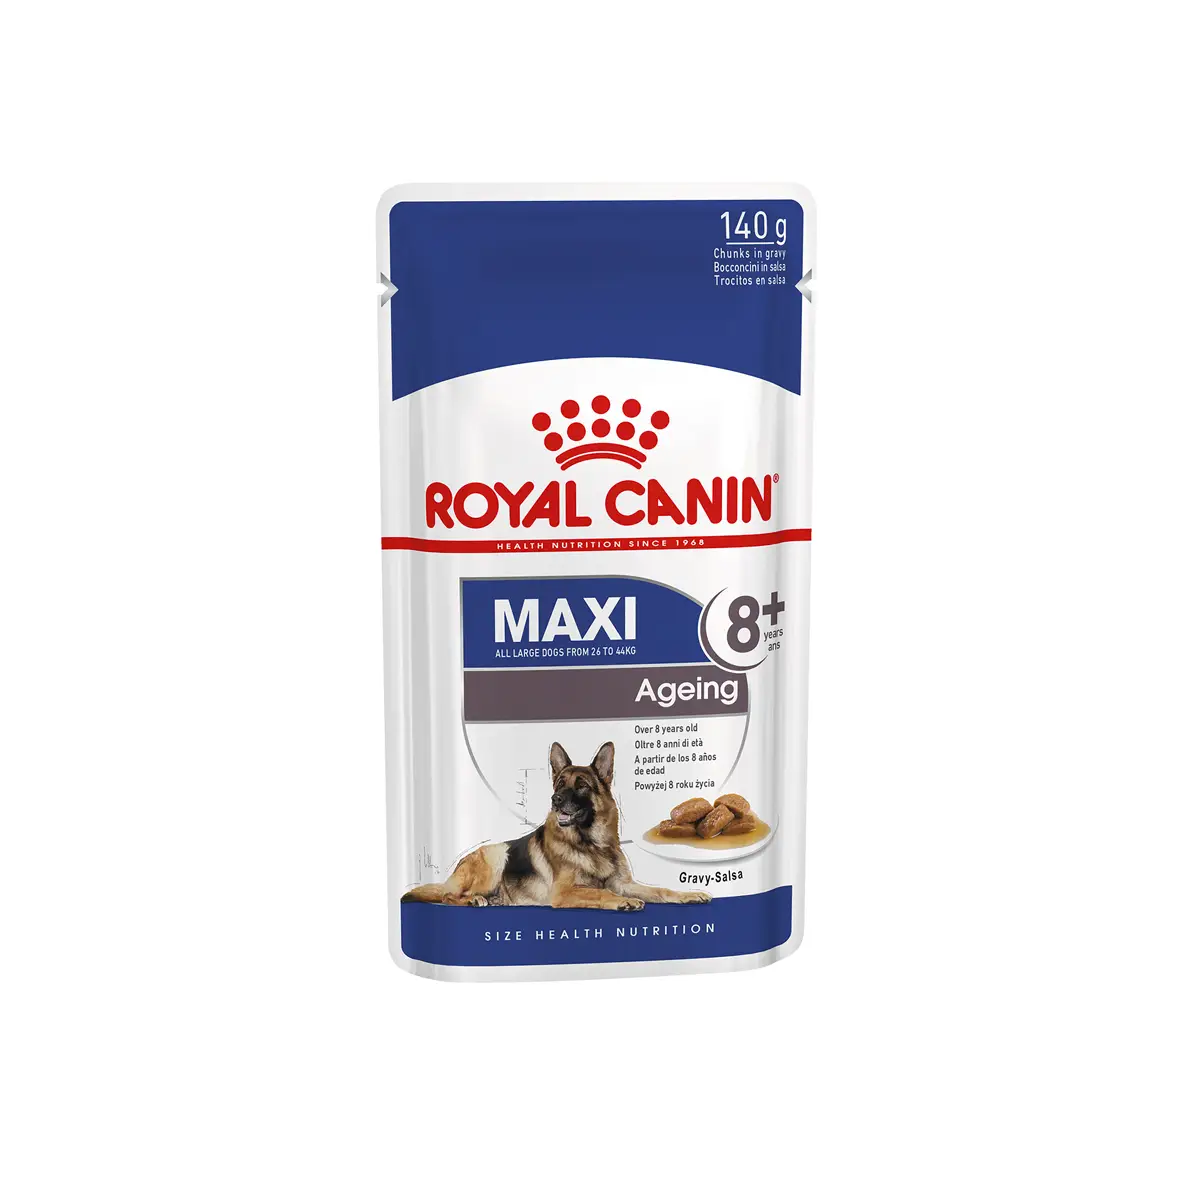 Royal Canin - Ageing 8+ MAXI Gravy Wet Food 140g